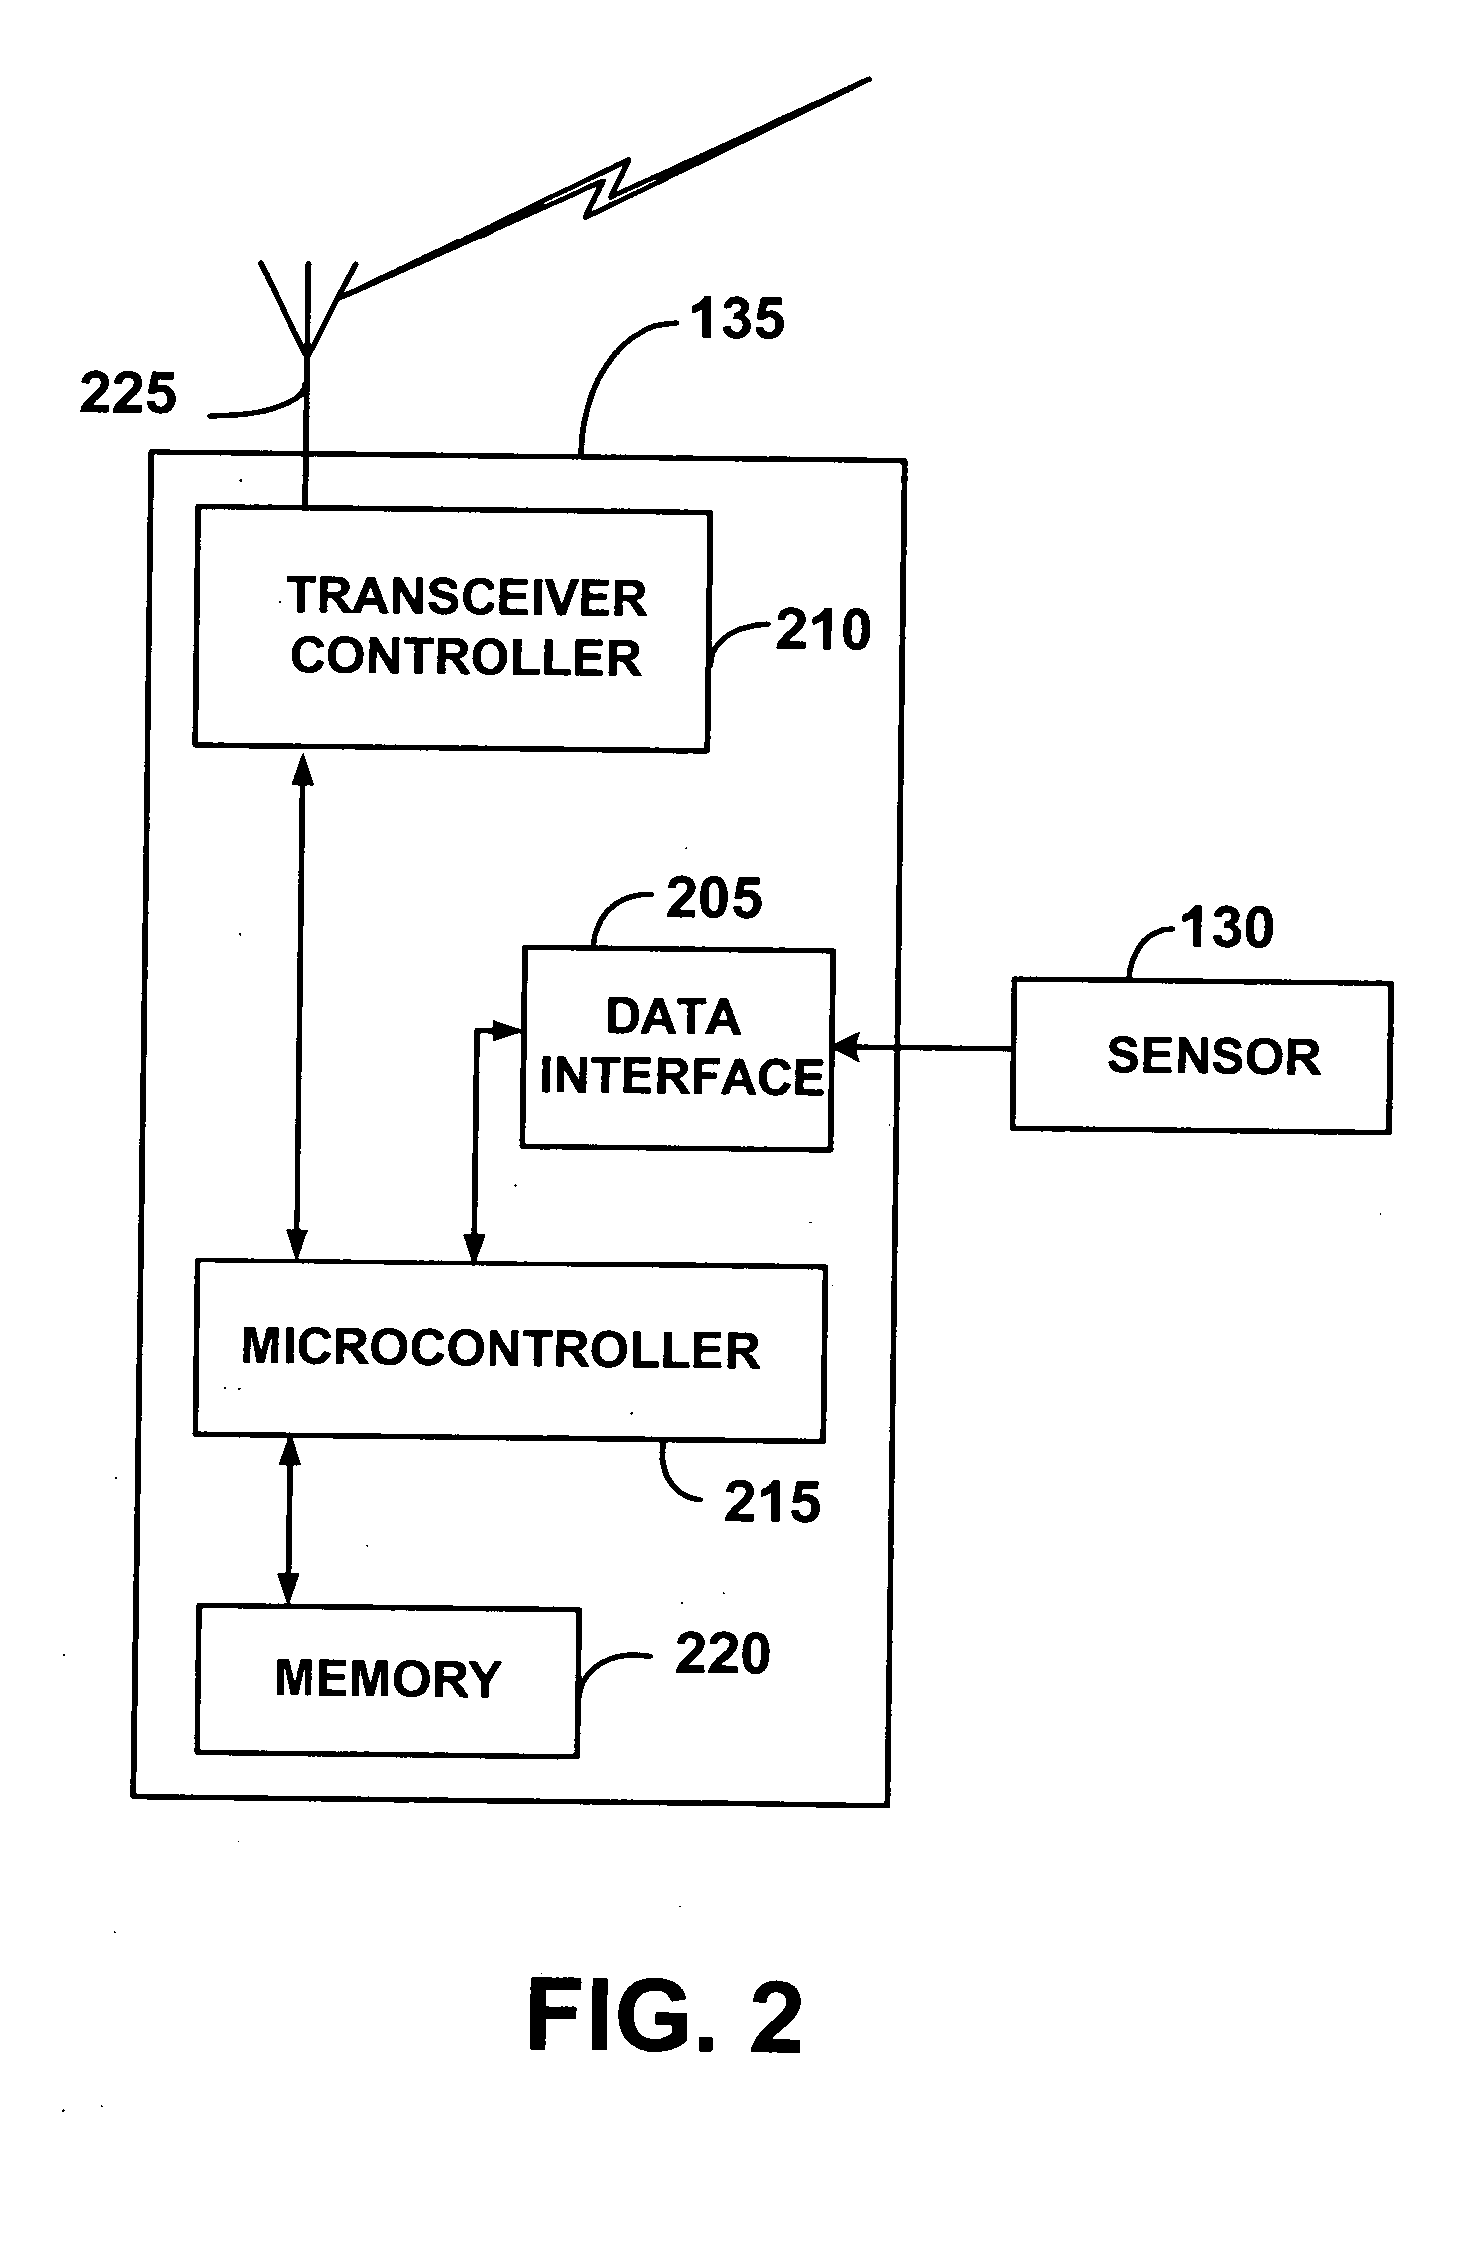 Systems and methods for providing remote monitoring of electricity consumption for an electric meter